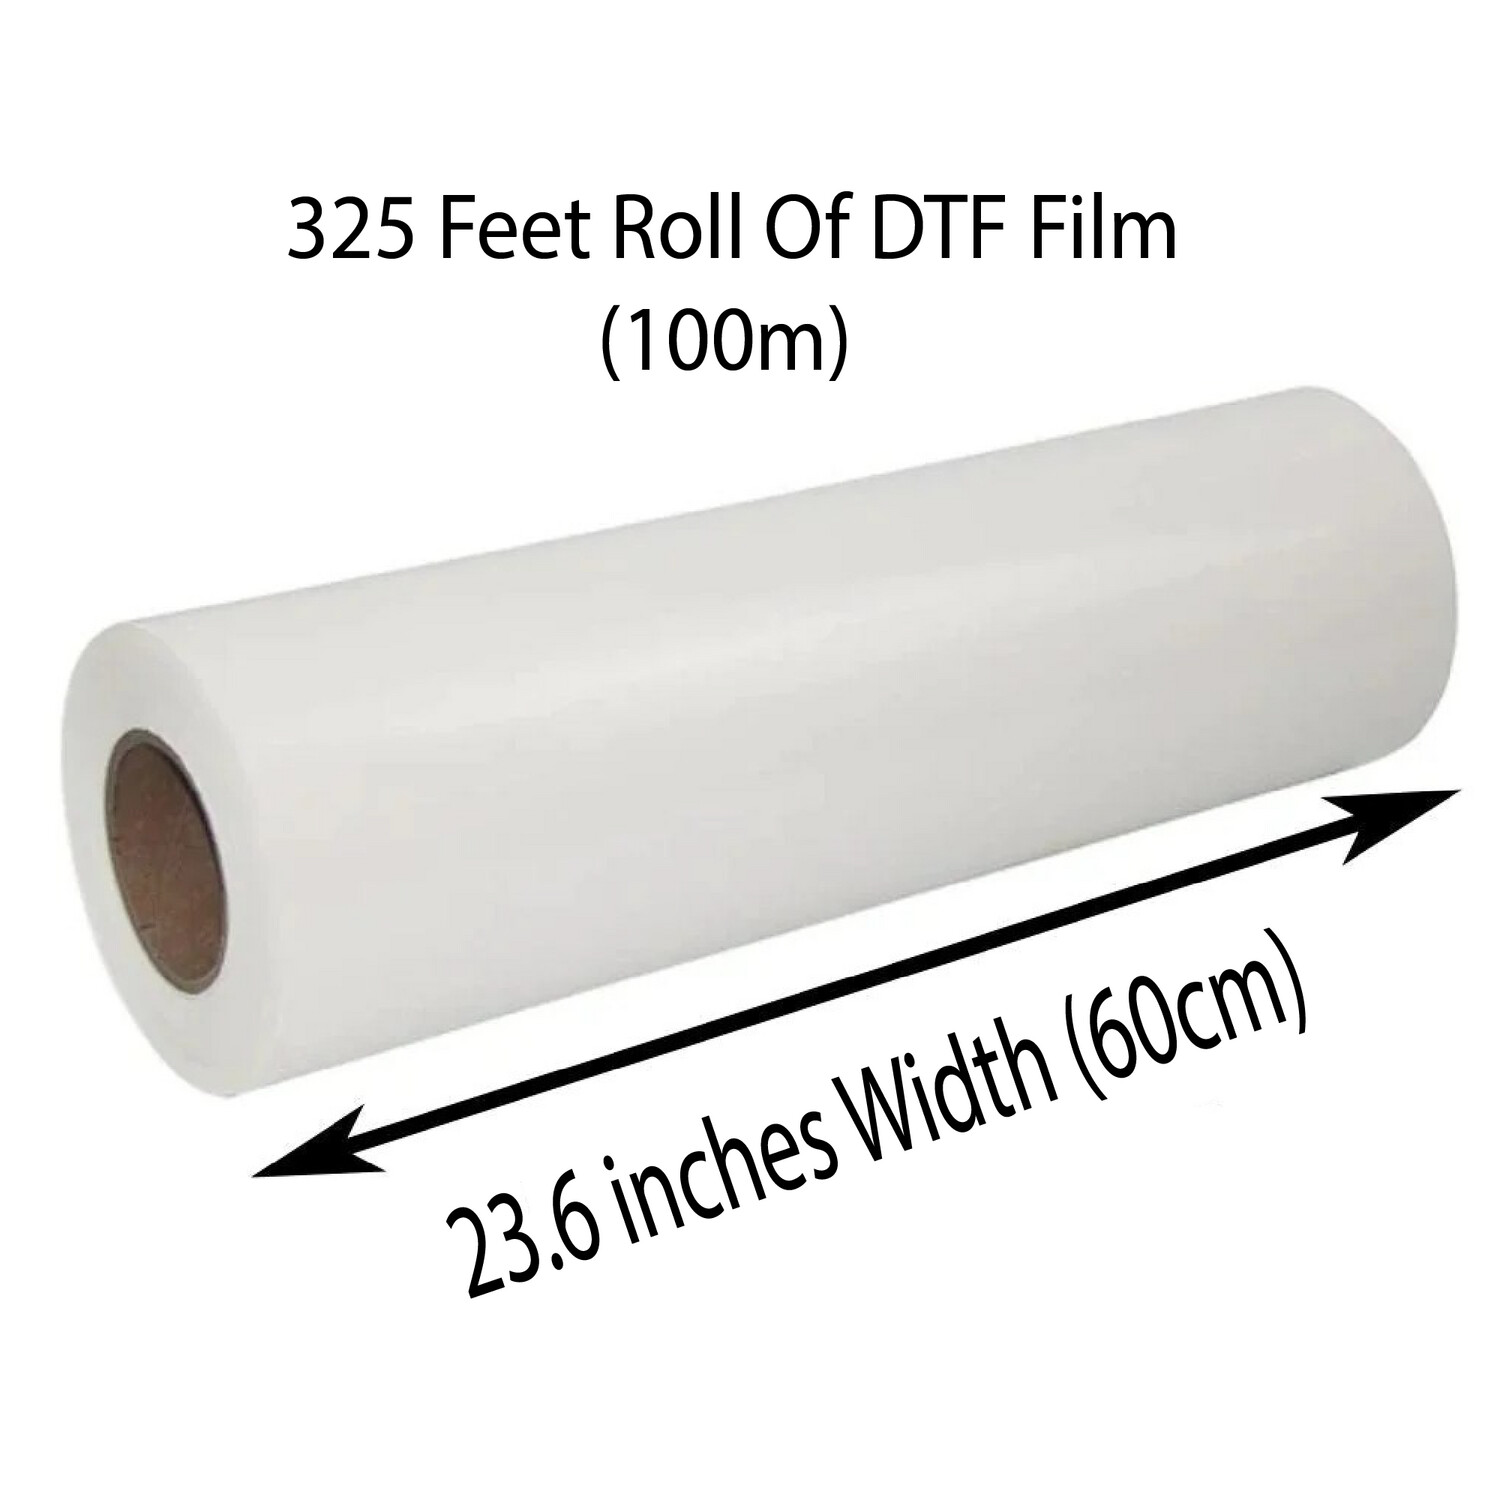 23.6' x 325' HOT Peel DTF Film - Double Sided